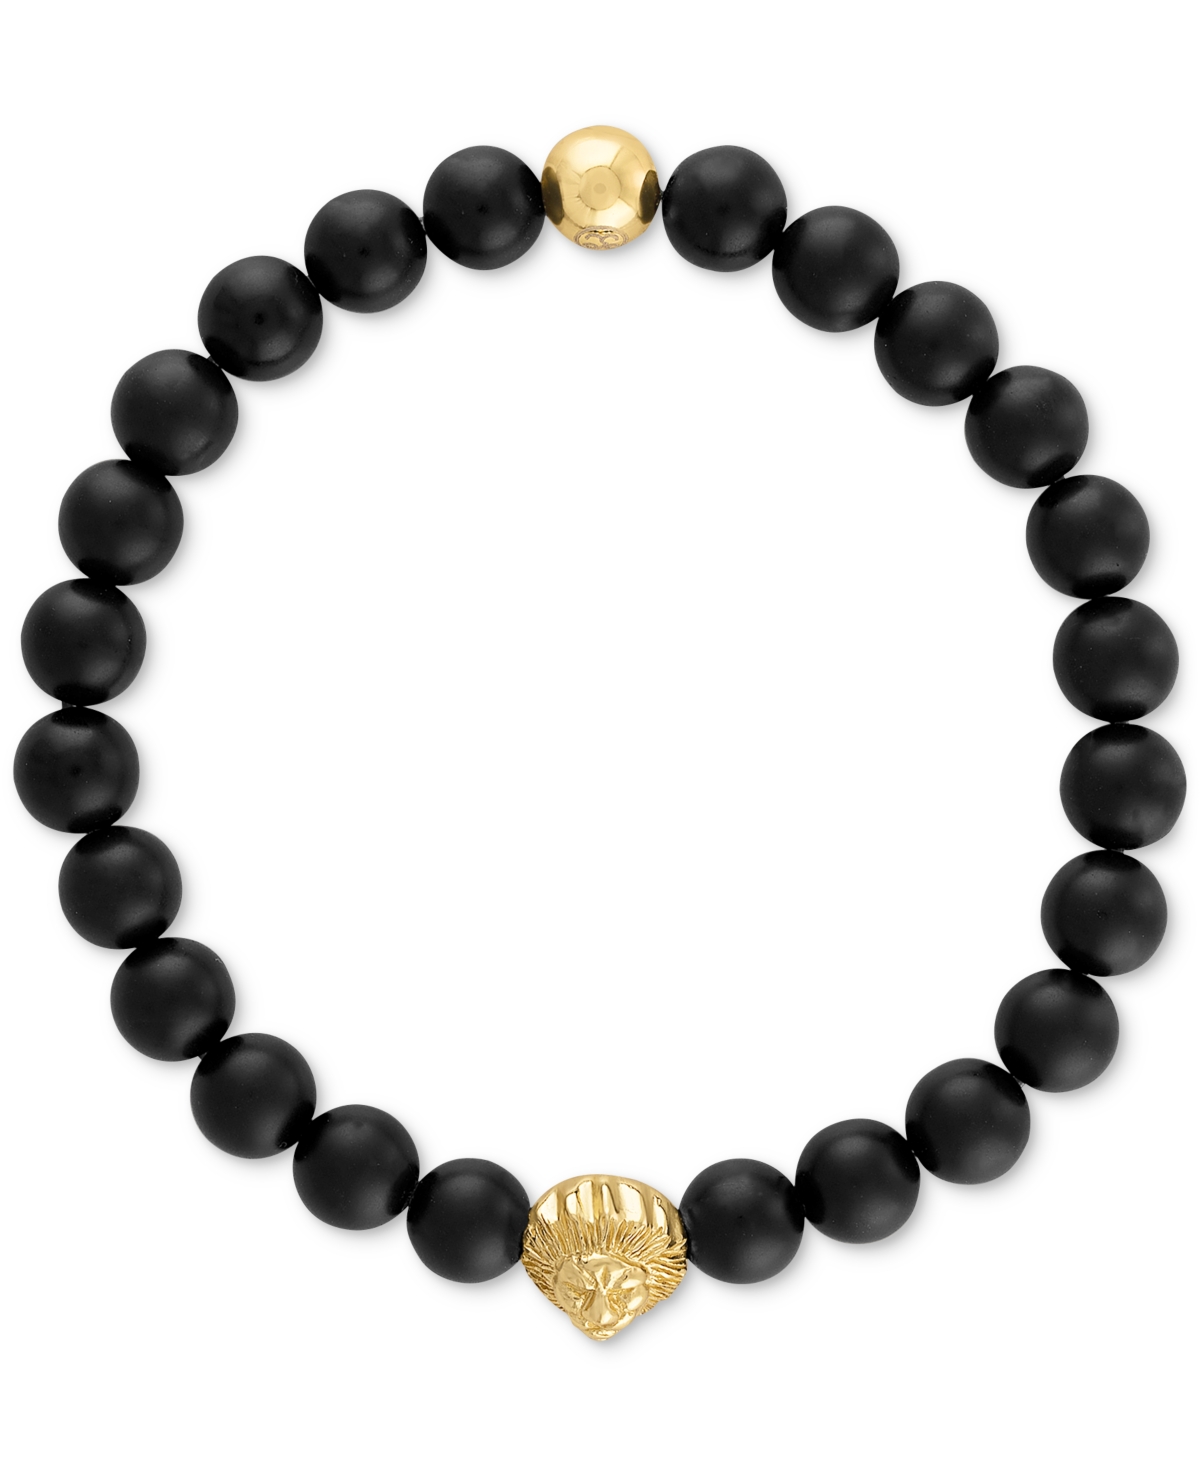 Esquire Men's Jewelry Onyx & Lion Bead Stretch Bracelet in 14k Gold-Plated Sterling Silver, (Also in Blue Tiger Eye), Created for Macy's